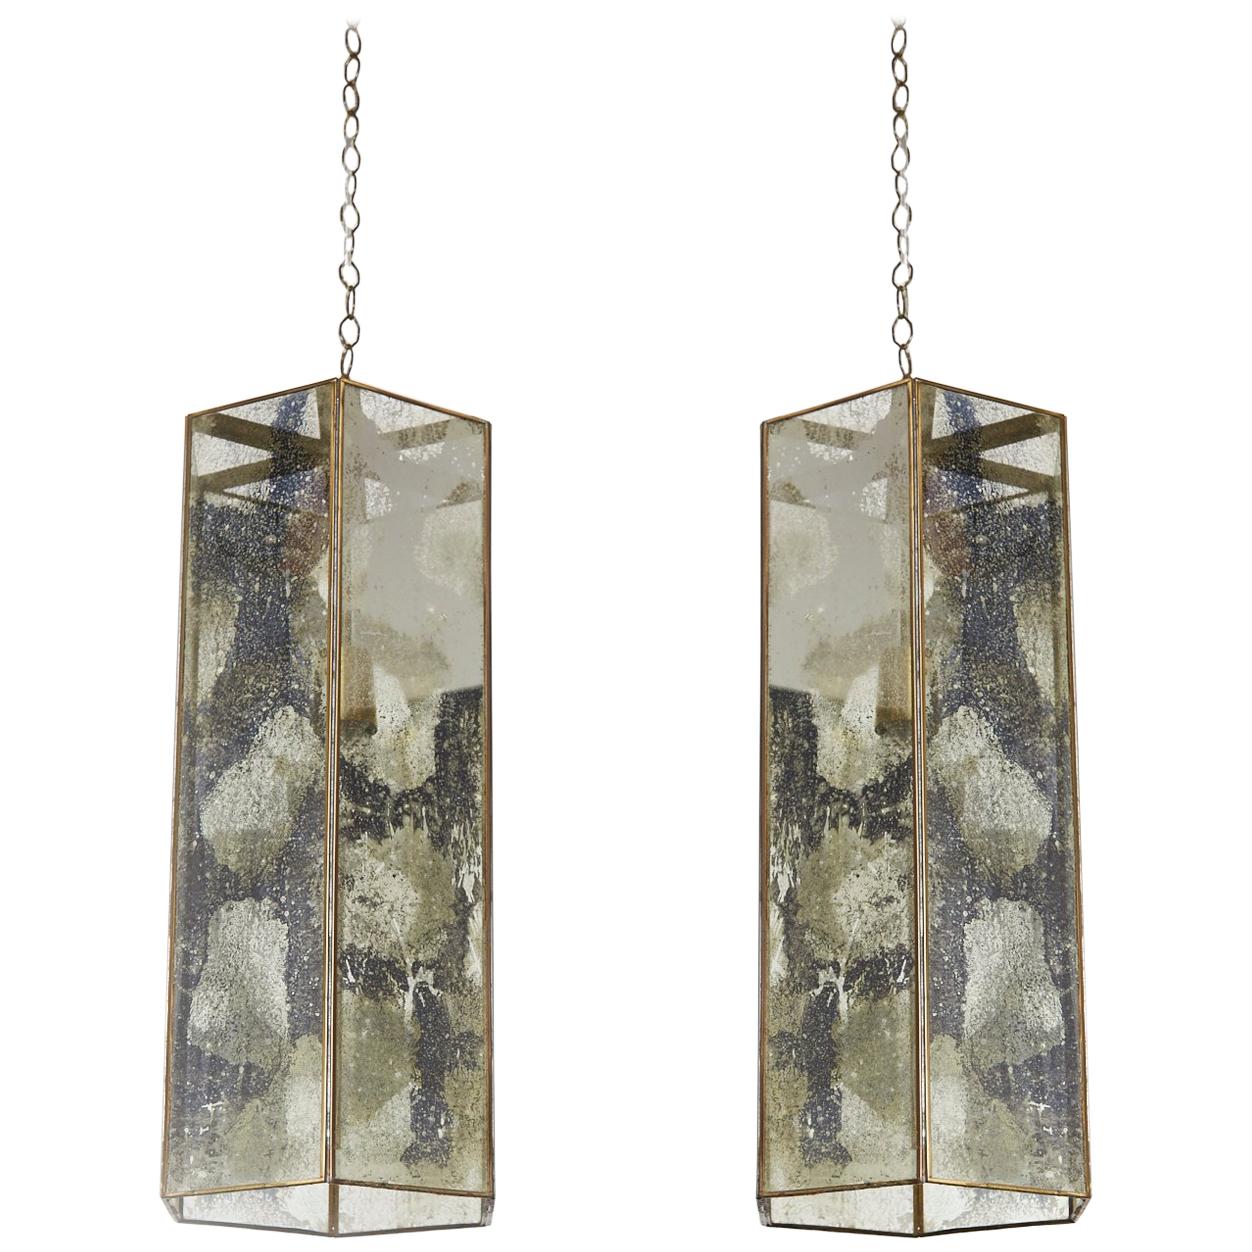 Pair of Contemporary Brass and Mercury Style Glass Pendant Lamps or Lanterns